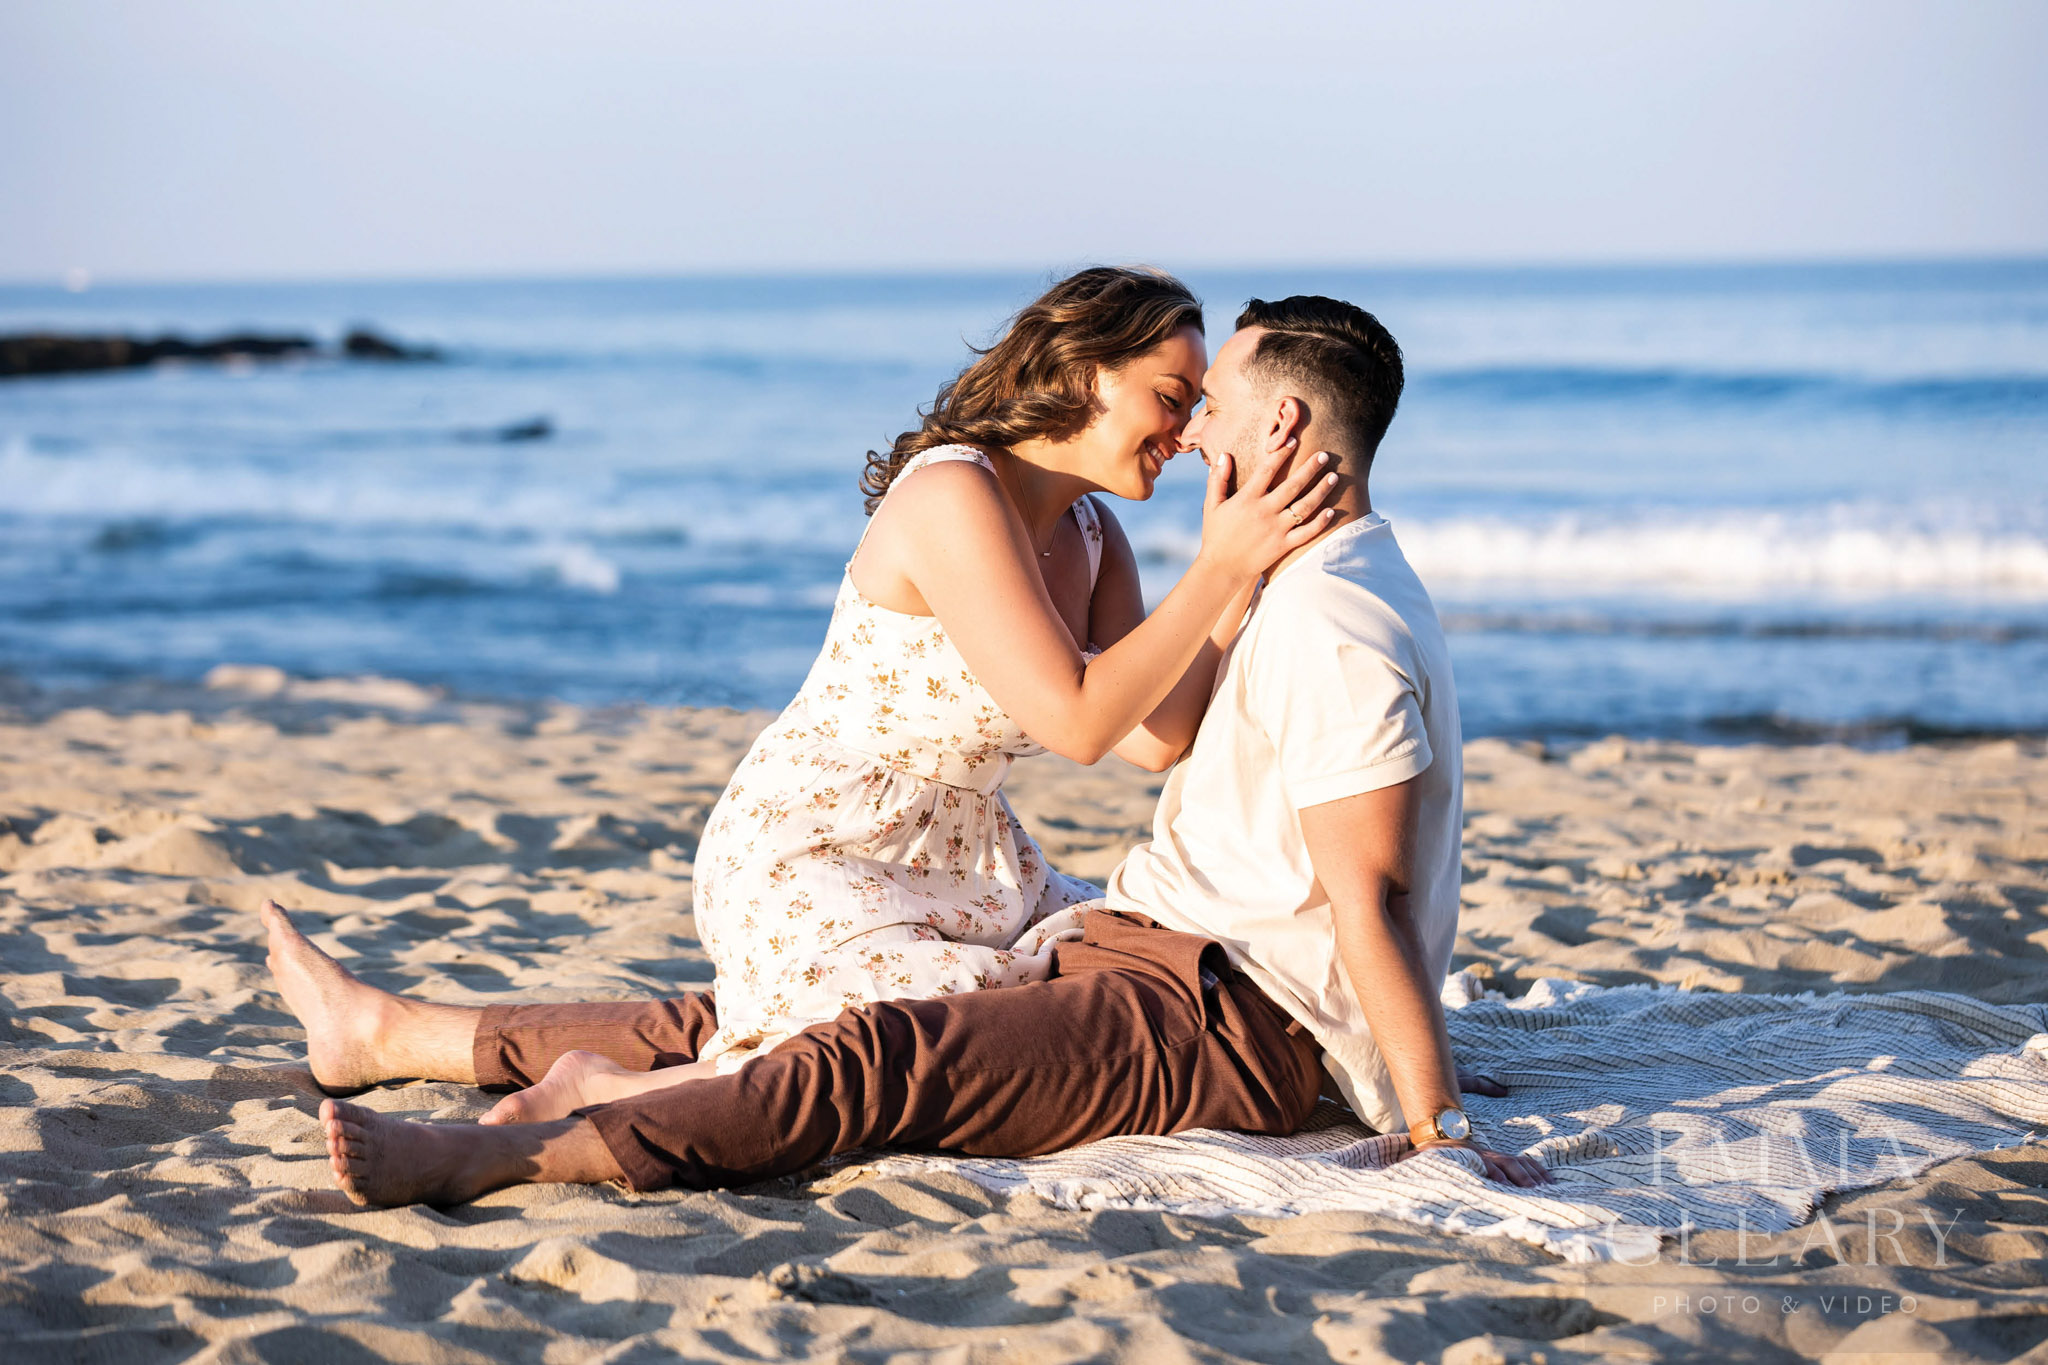 An engagement photo of a couple on the beach